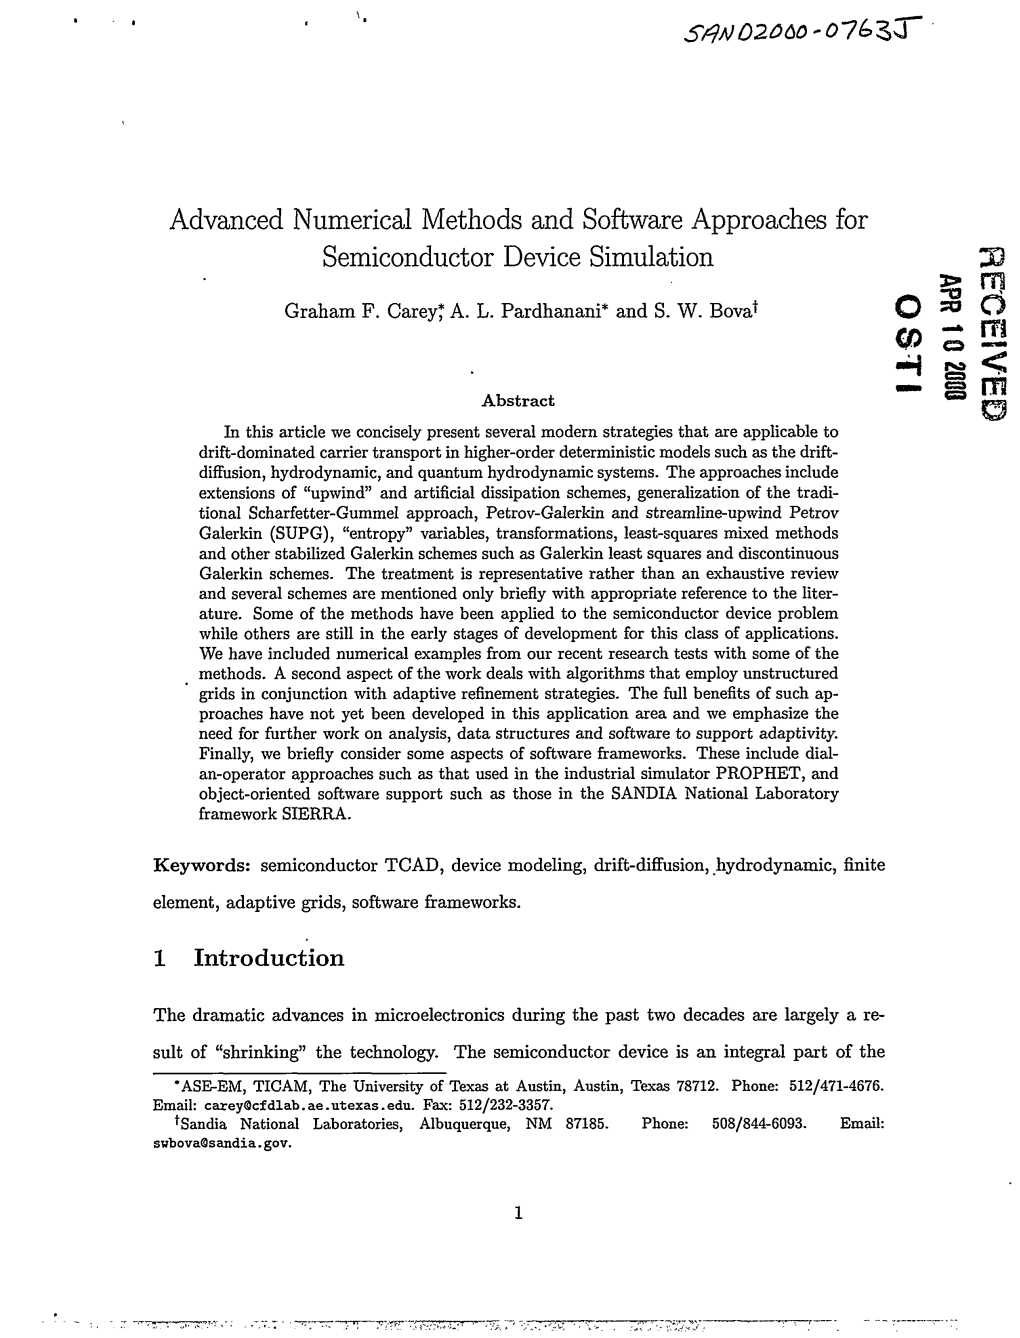 Advanced Numerical Methods and Software Approaches for Semiconductor Device Simulation